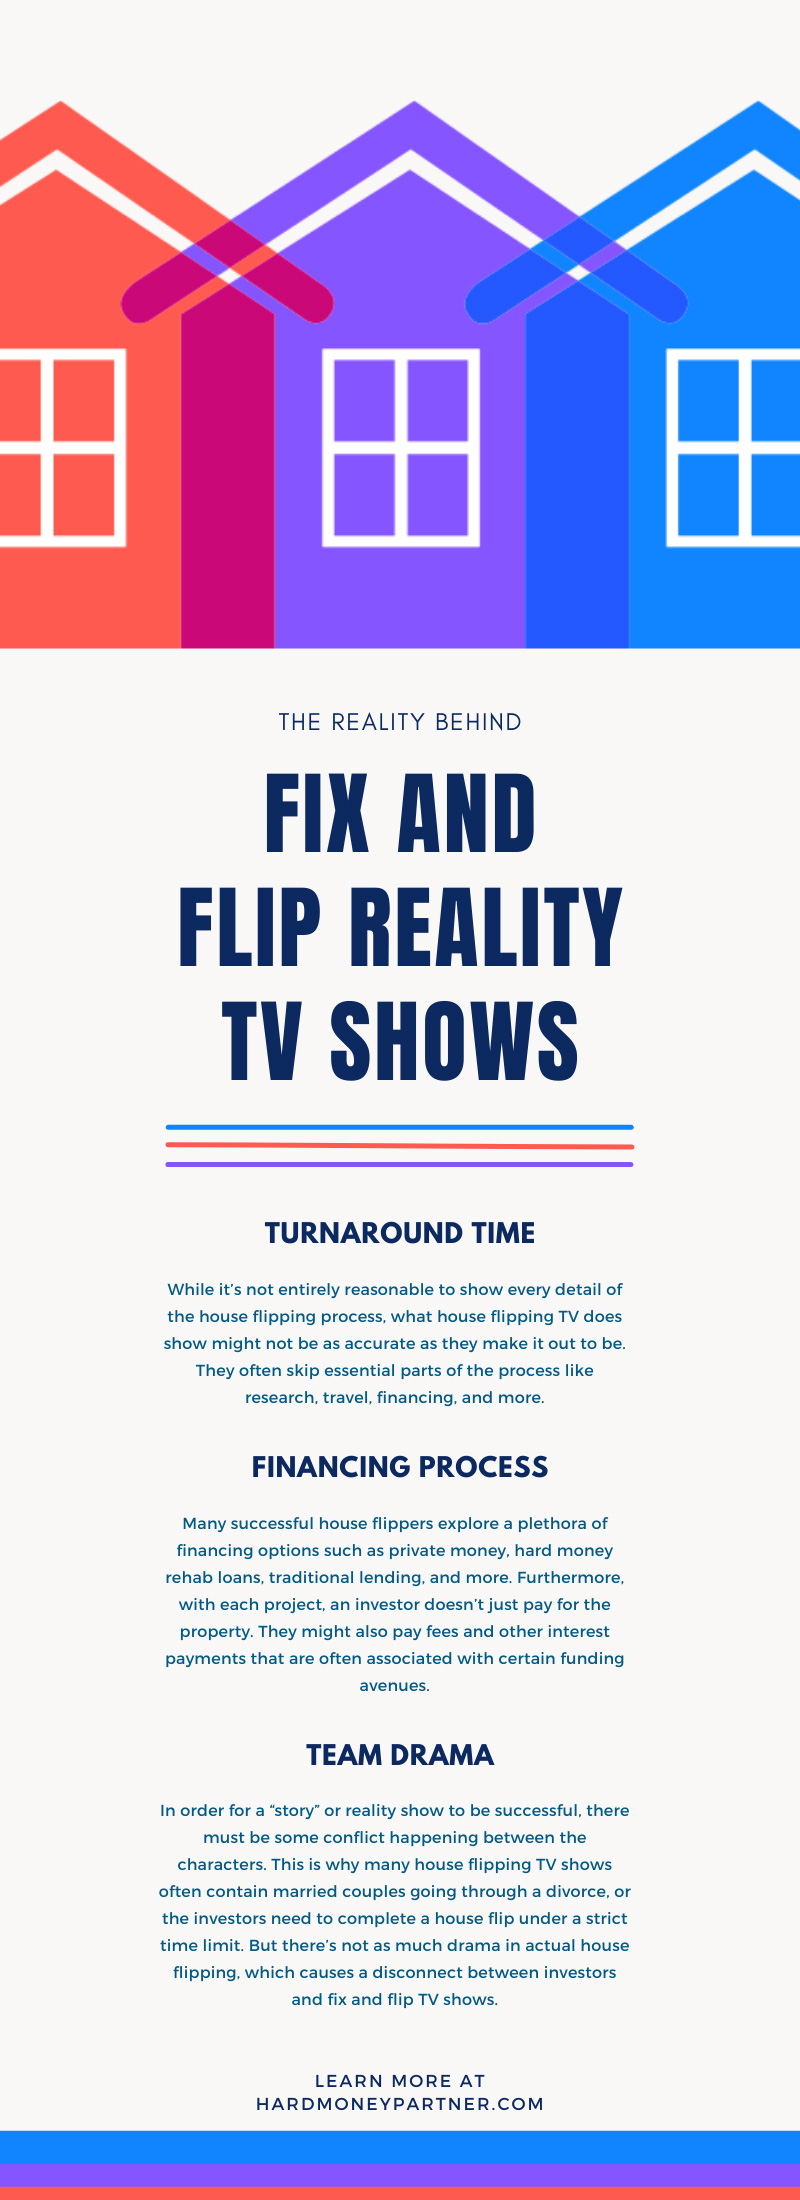 The Reality Behind Fix and Flip Reality TV Shows